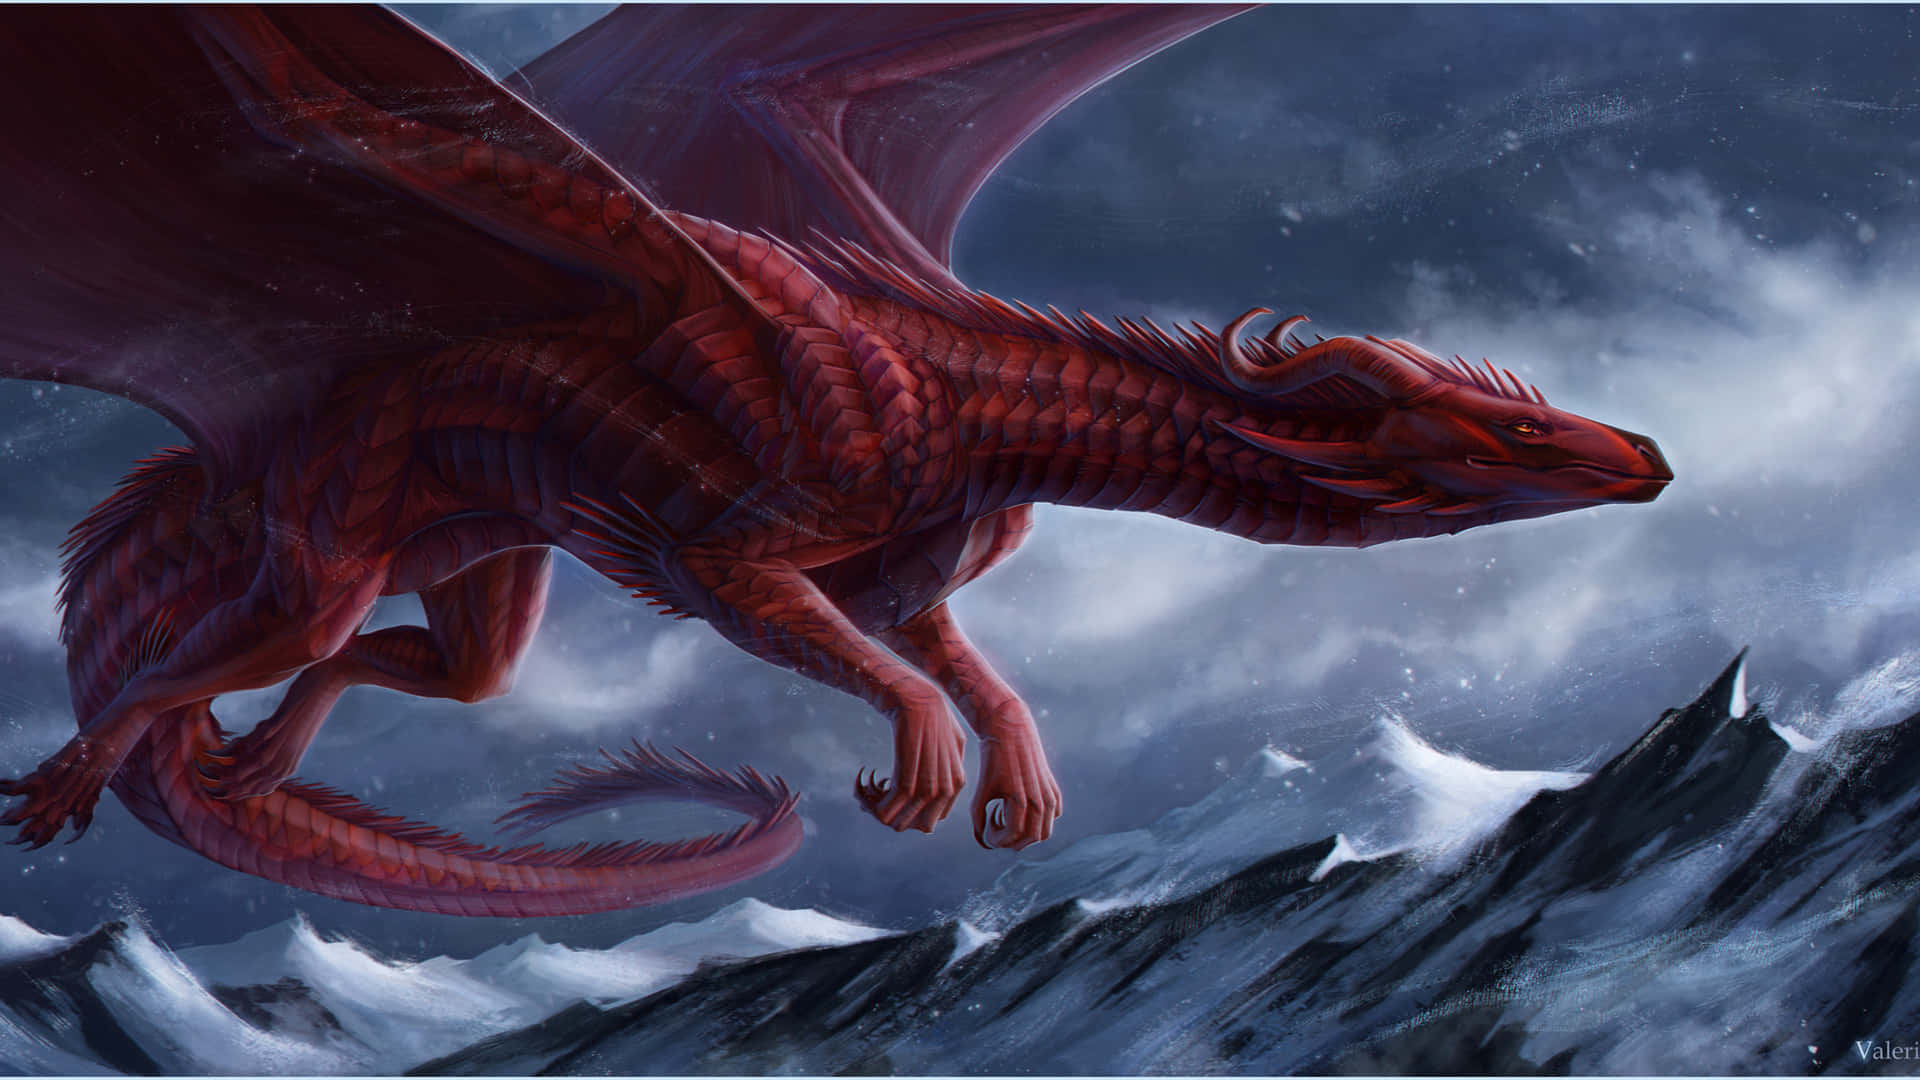 This Epic Dragon Will Light Up Any Room Wallpaper